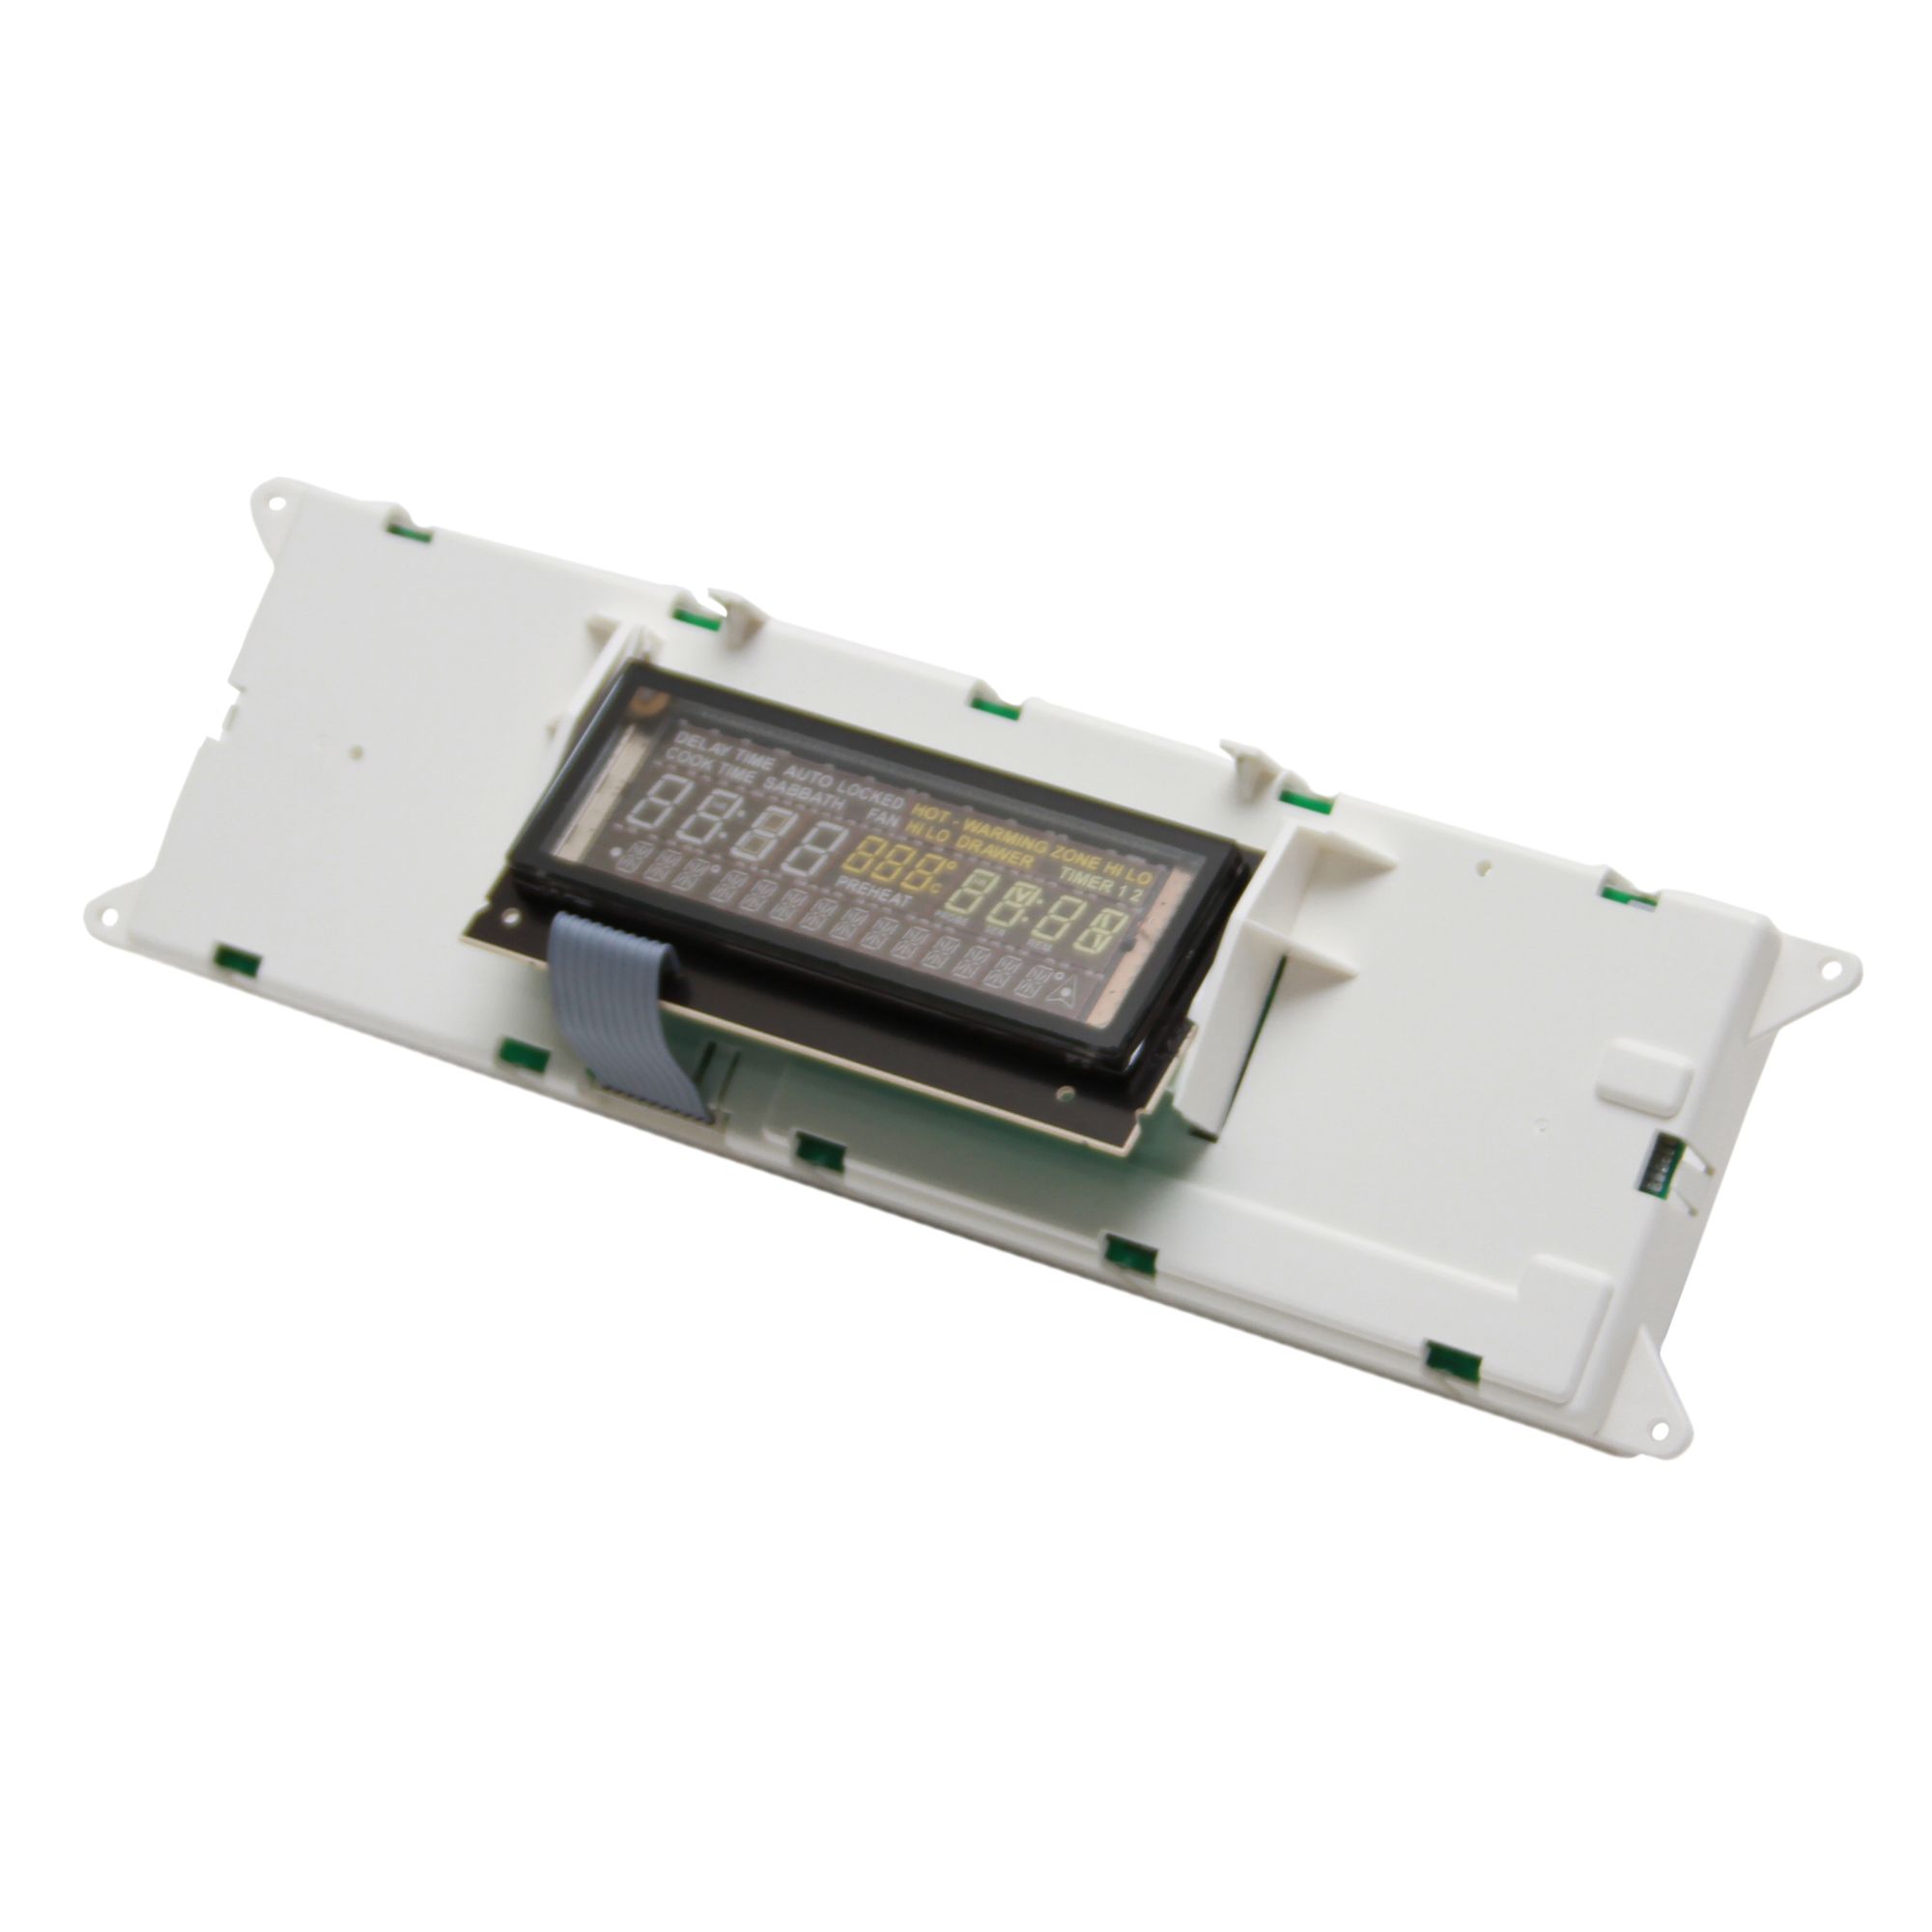 Whirlpool Range Electronic Control Board. Part #WP8507P226-60RB